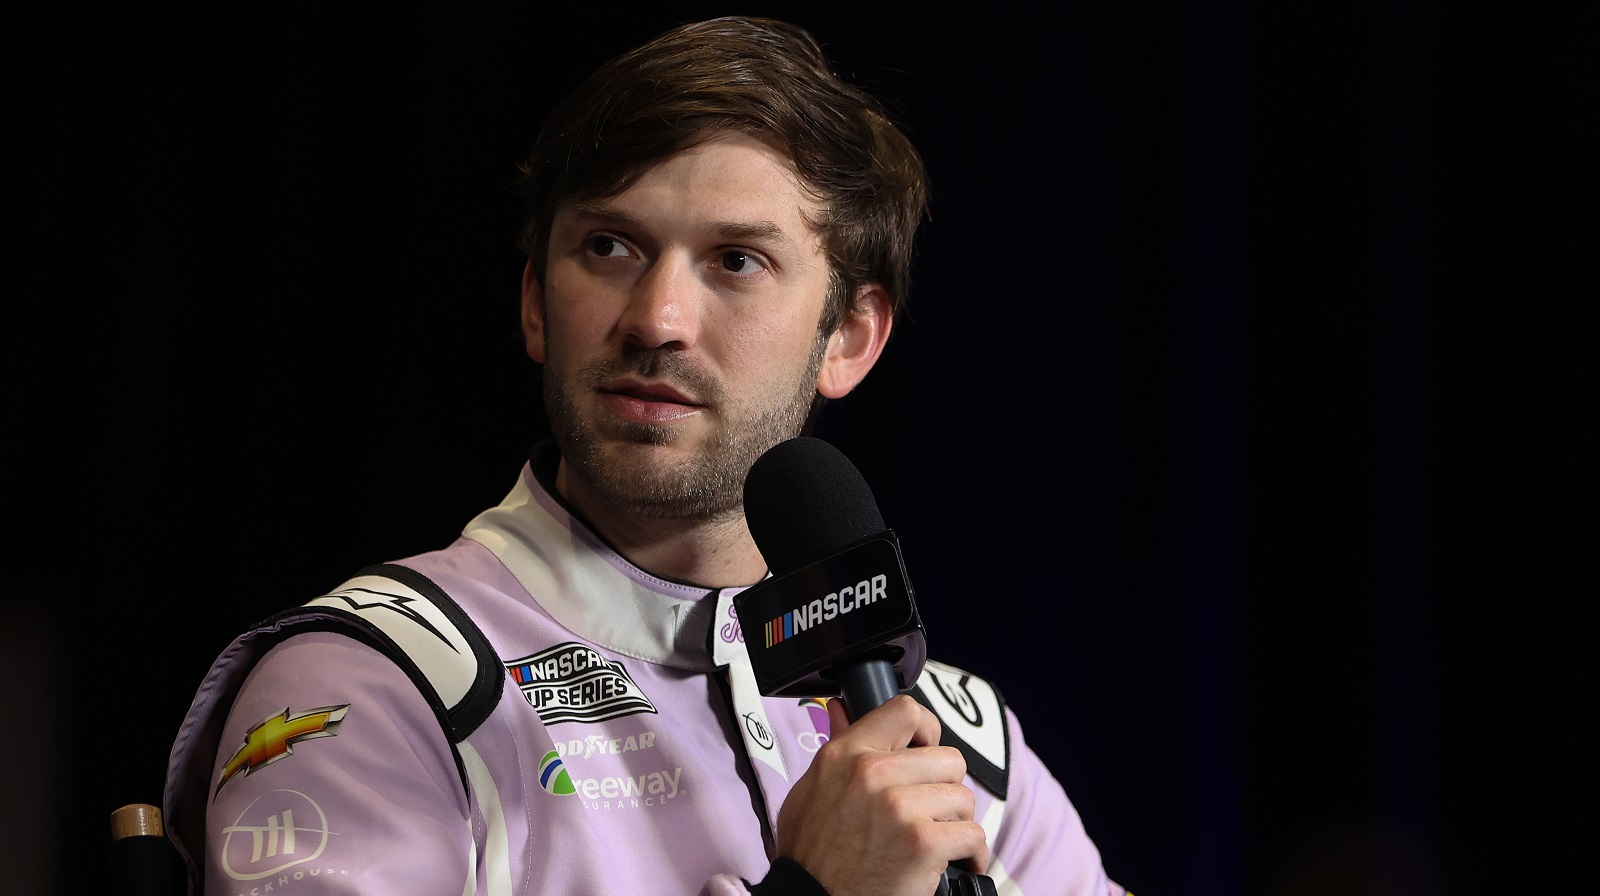 Daniel Suarez, driver of the No. 99 Chevrolet, speaks to the media ahead of the Daytona 500 at Daytona International Speedway on Feb. 16, 2022. | James Gilbert/Getty Images